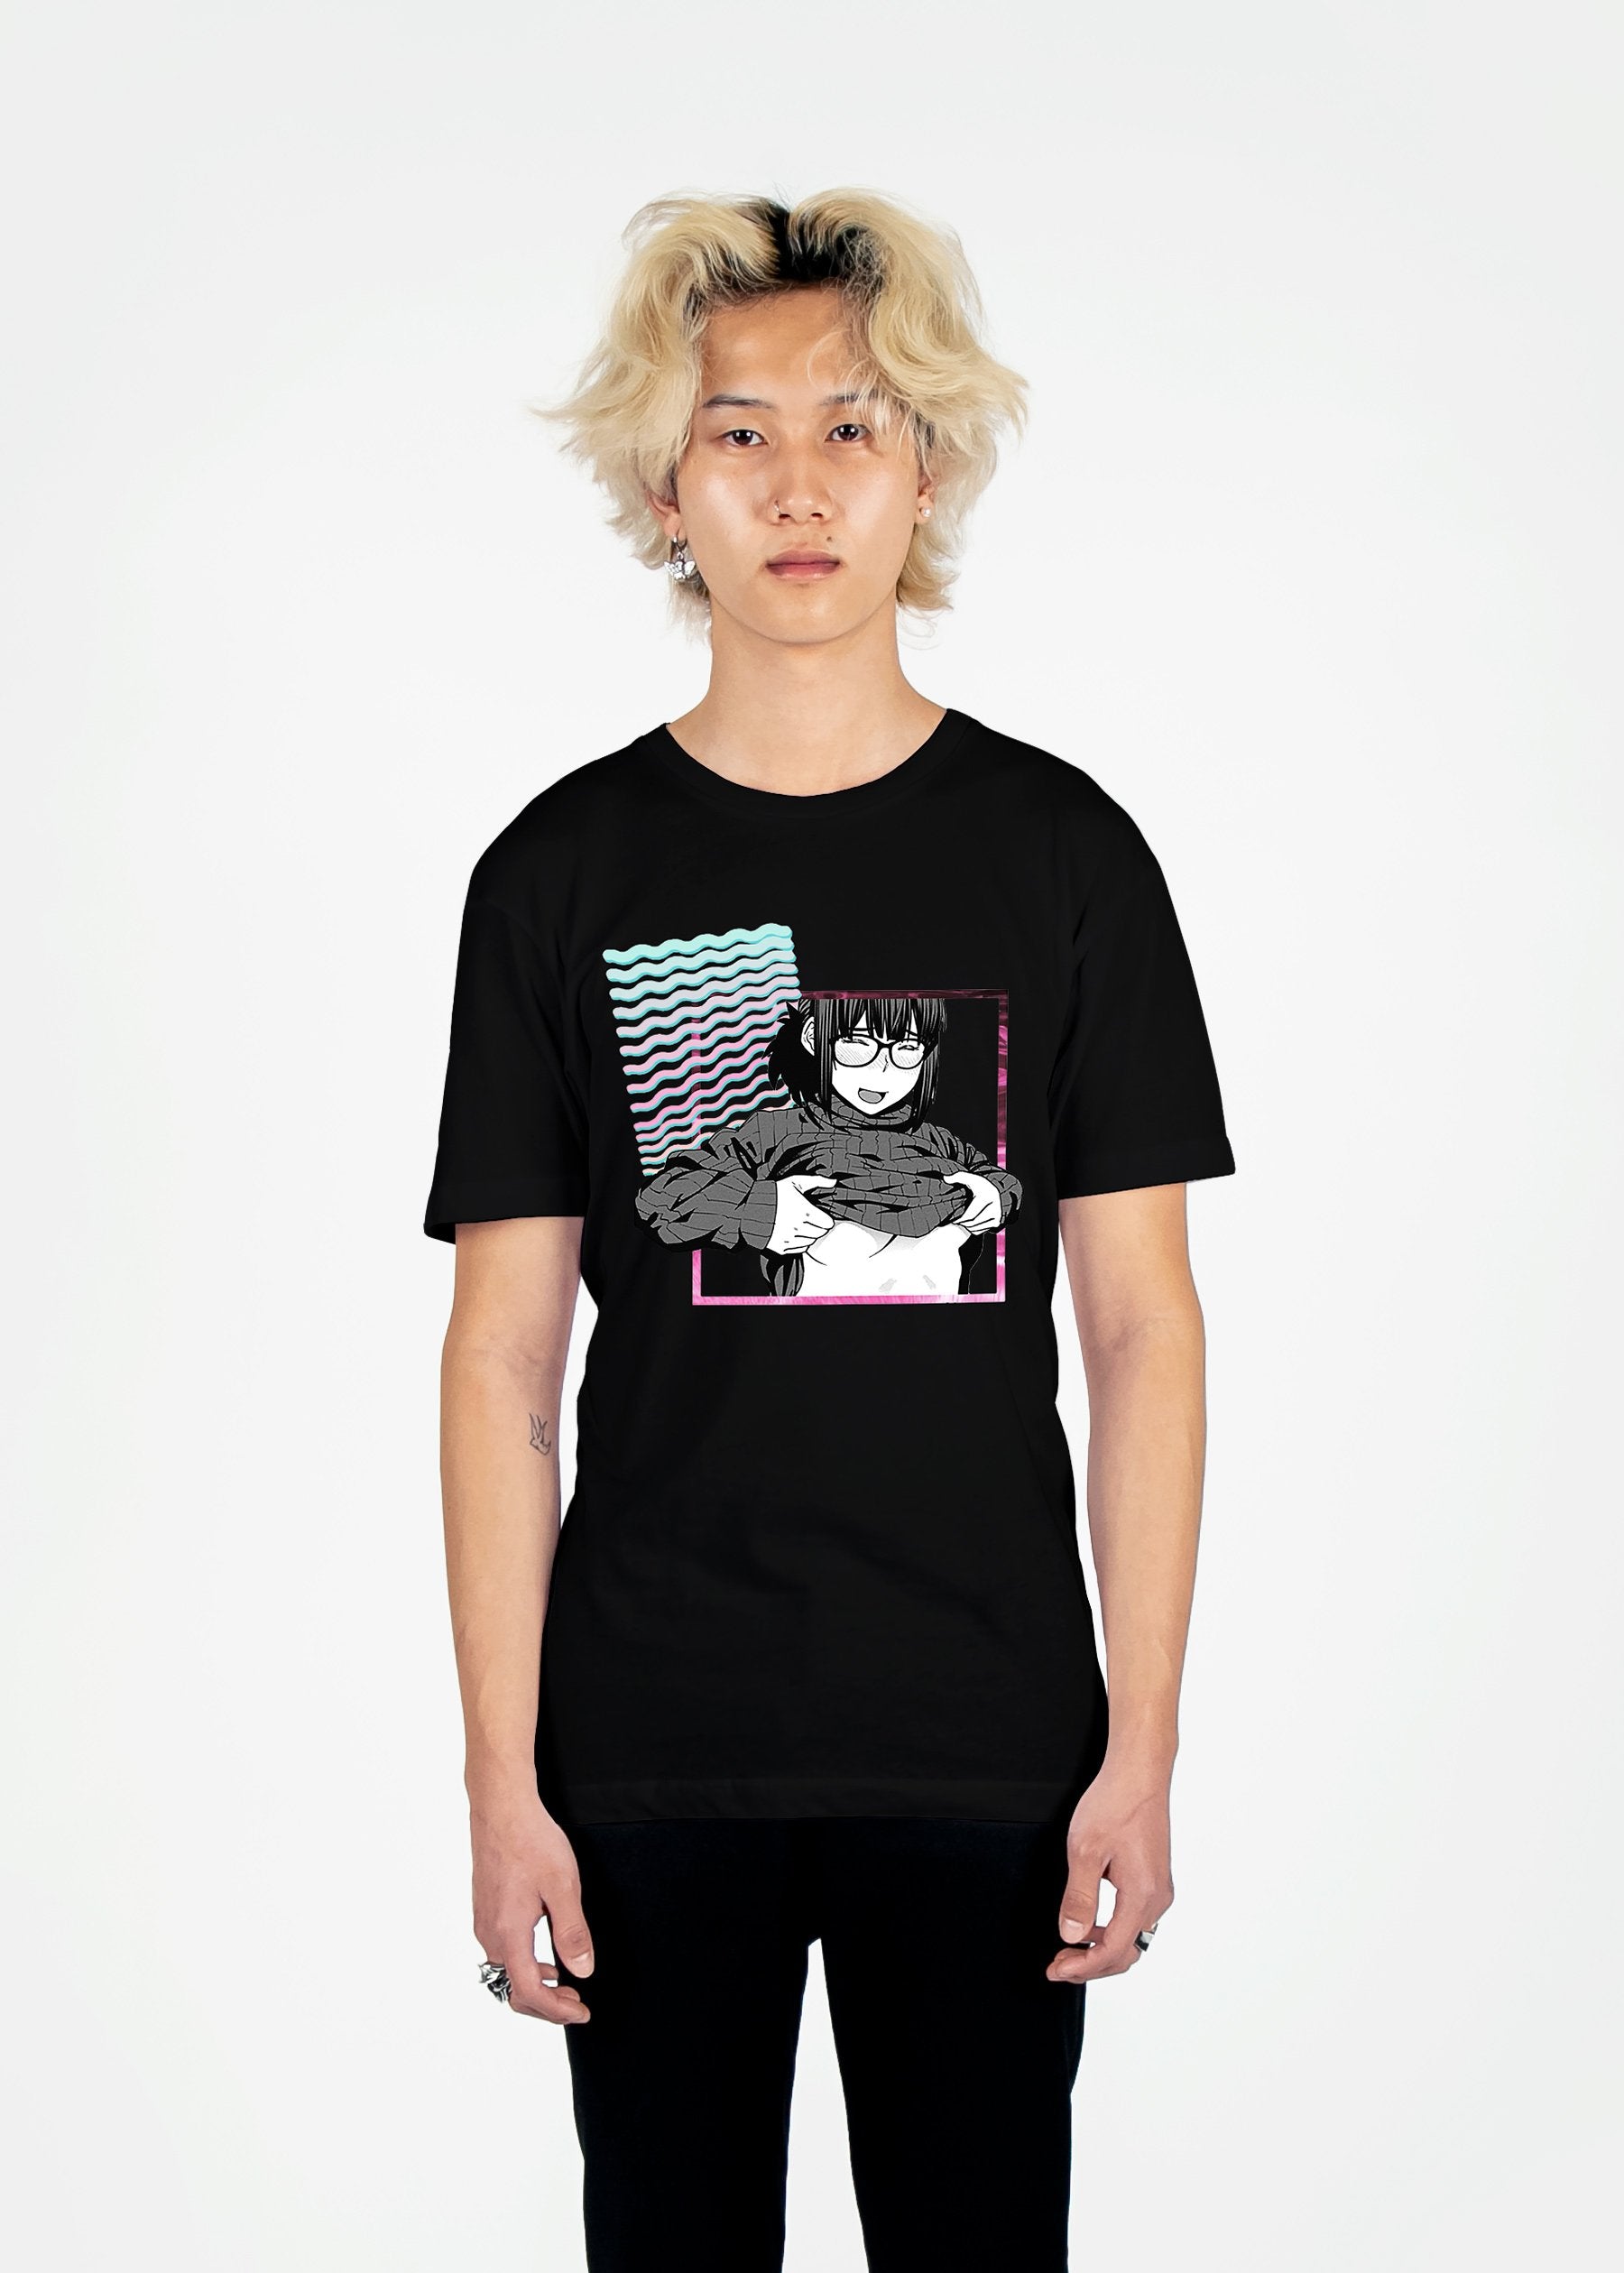 Private Moment Tee Graphic Tee Vapor95 Black S